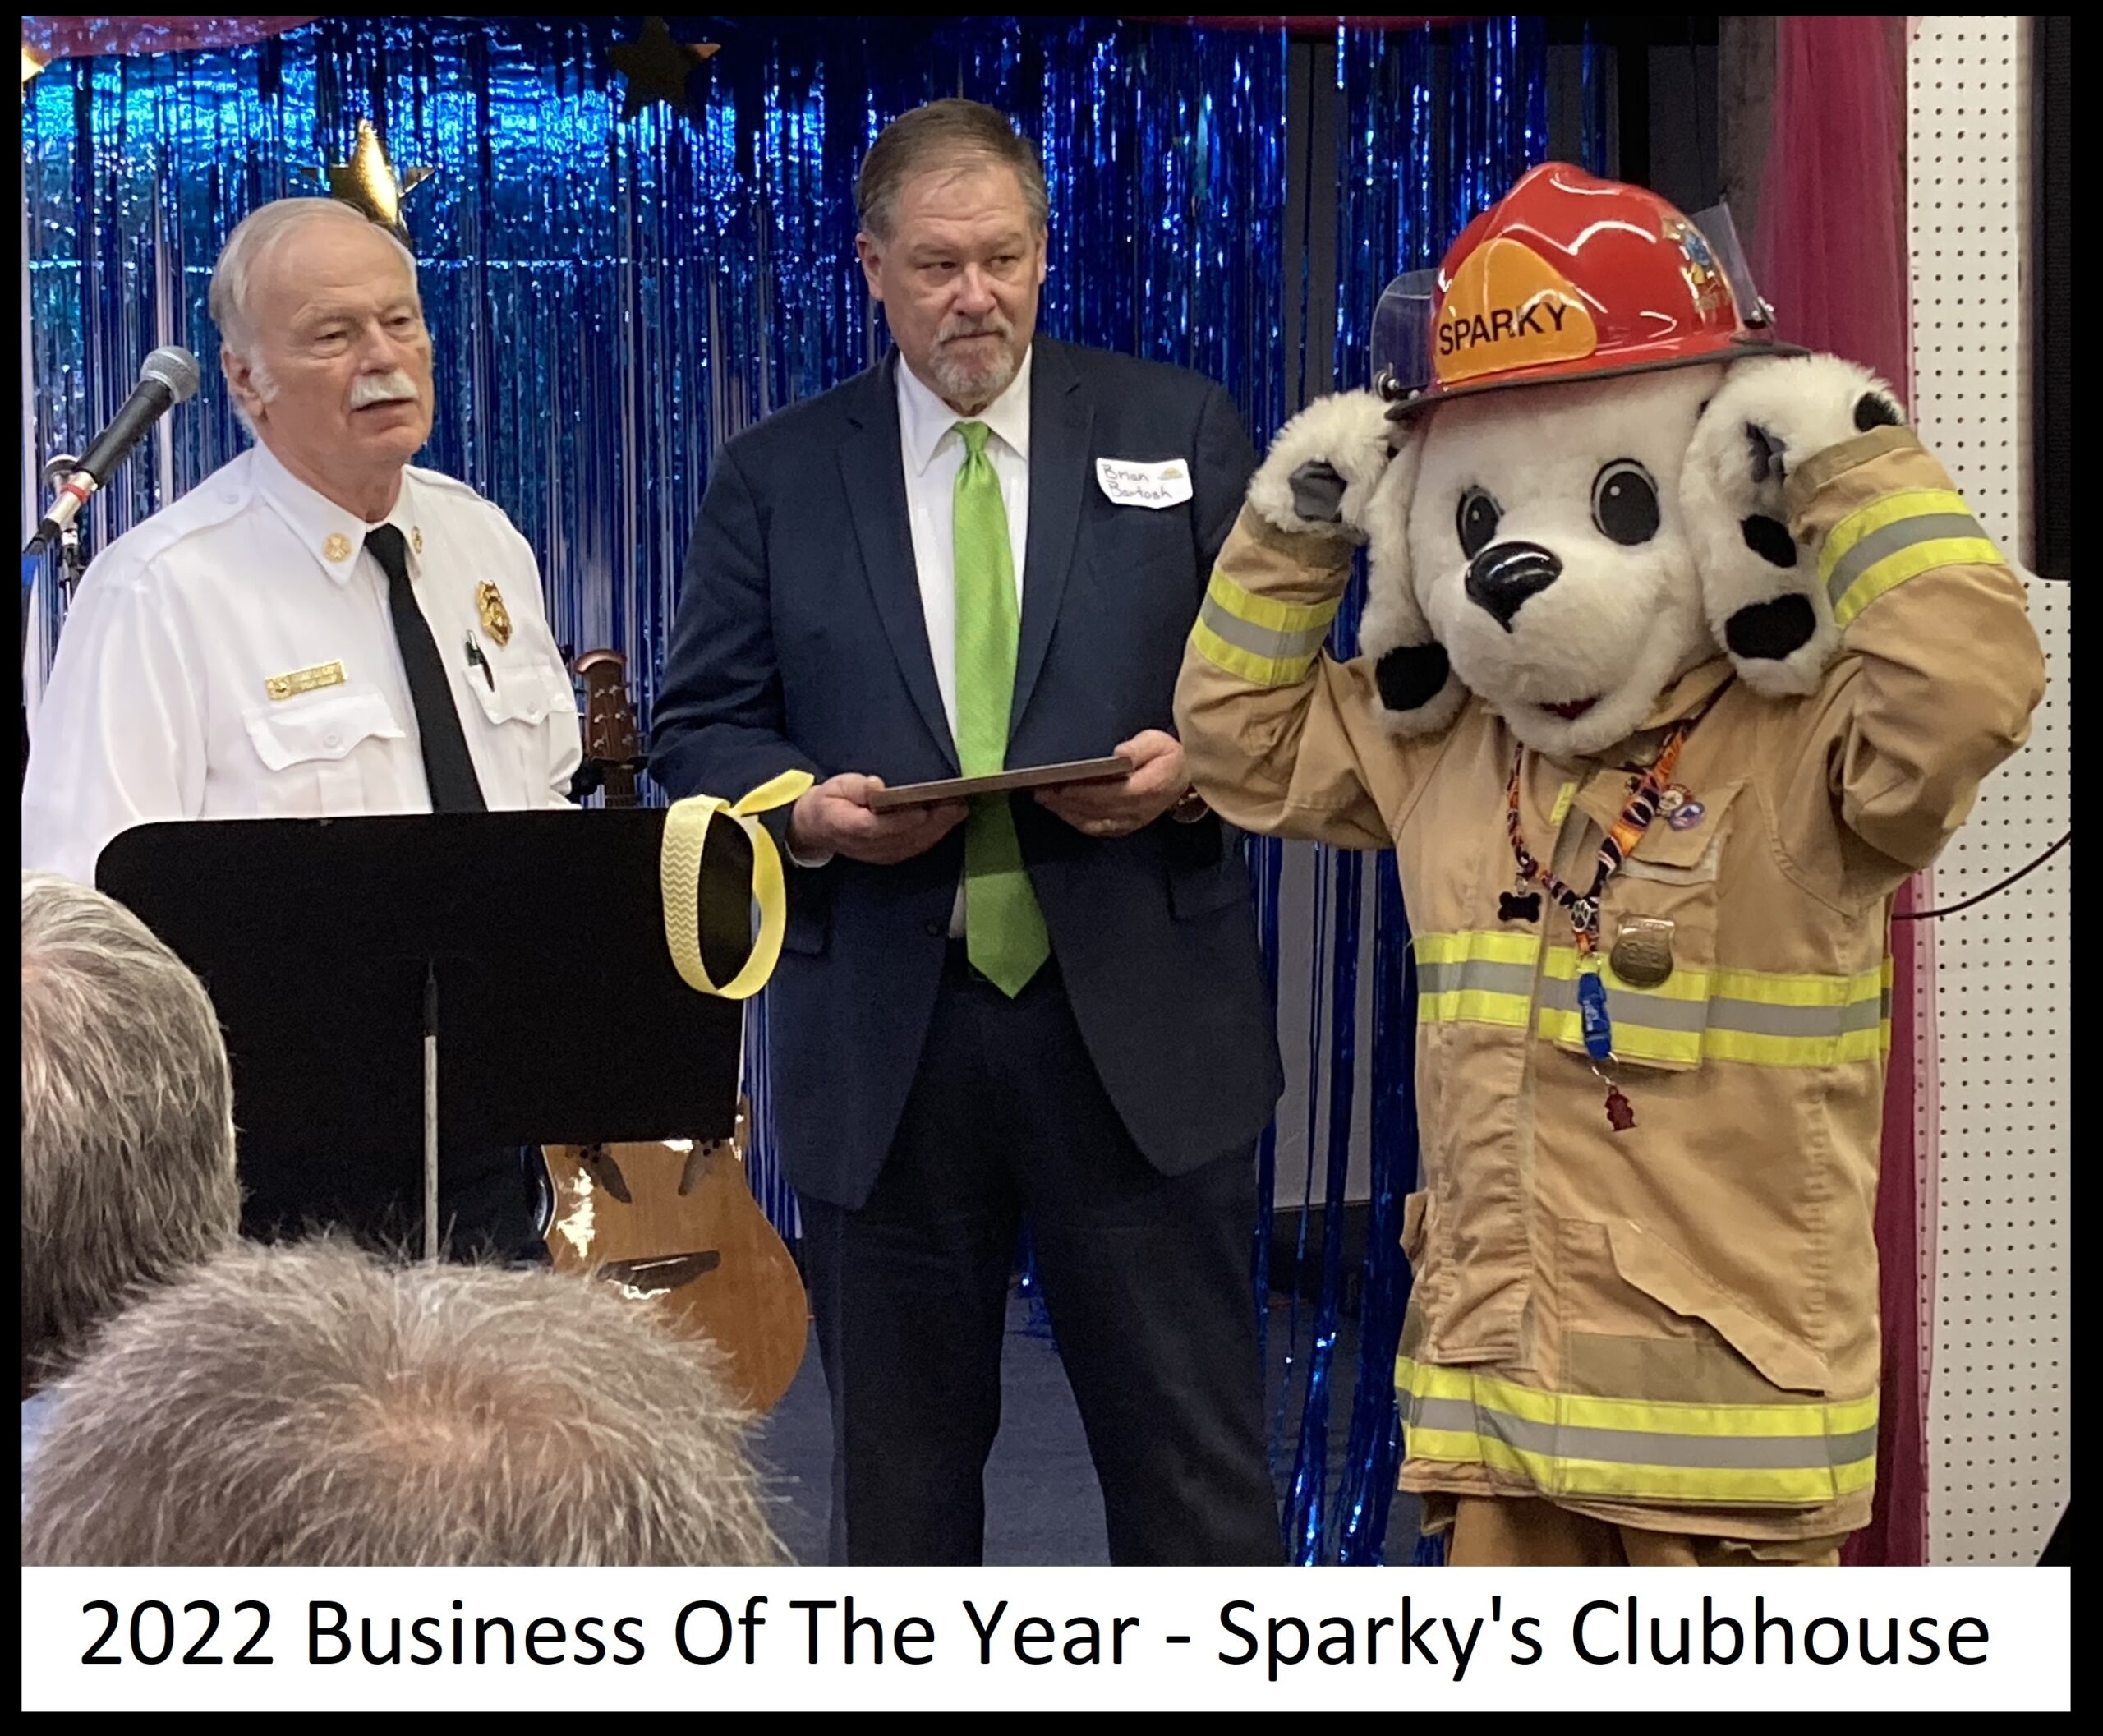 2022 Business Of The Year - Sparky's Clubhouse